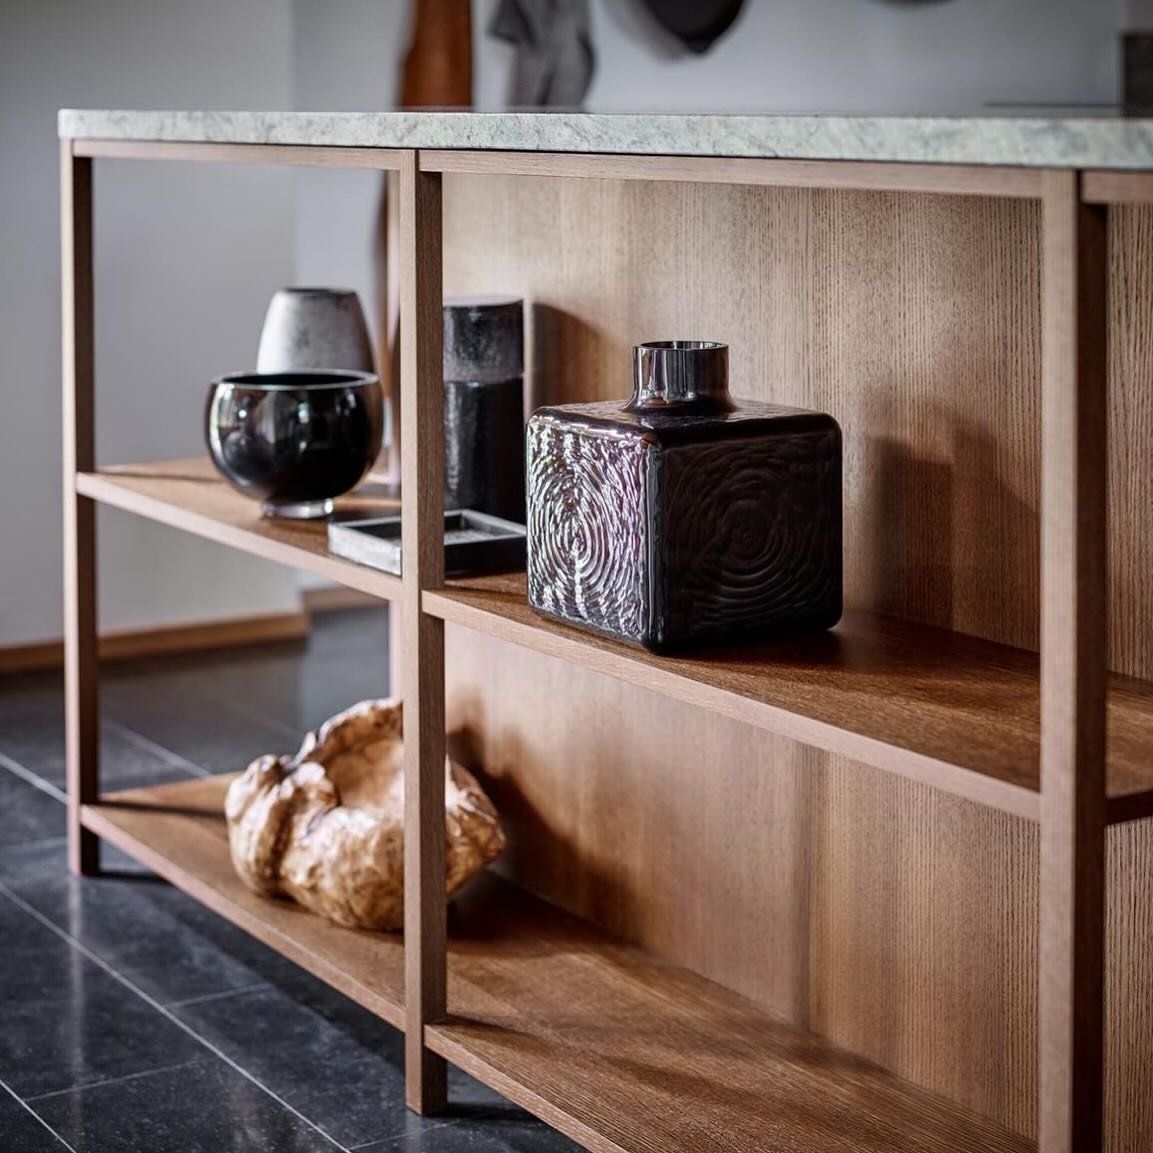 I&rsquo;m working on kitchen joinery at the moment for a new project and like the idea of an element of open shelving, to display beautiful objects. Kitchen by @kvanumofficial.